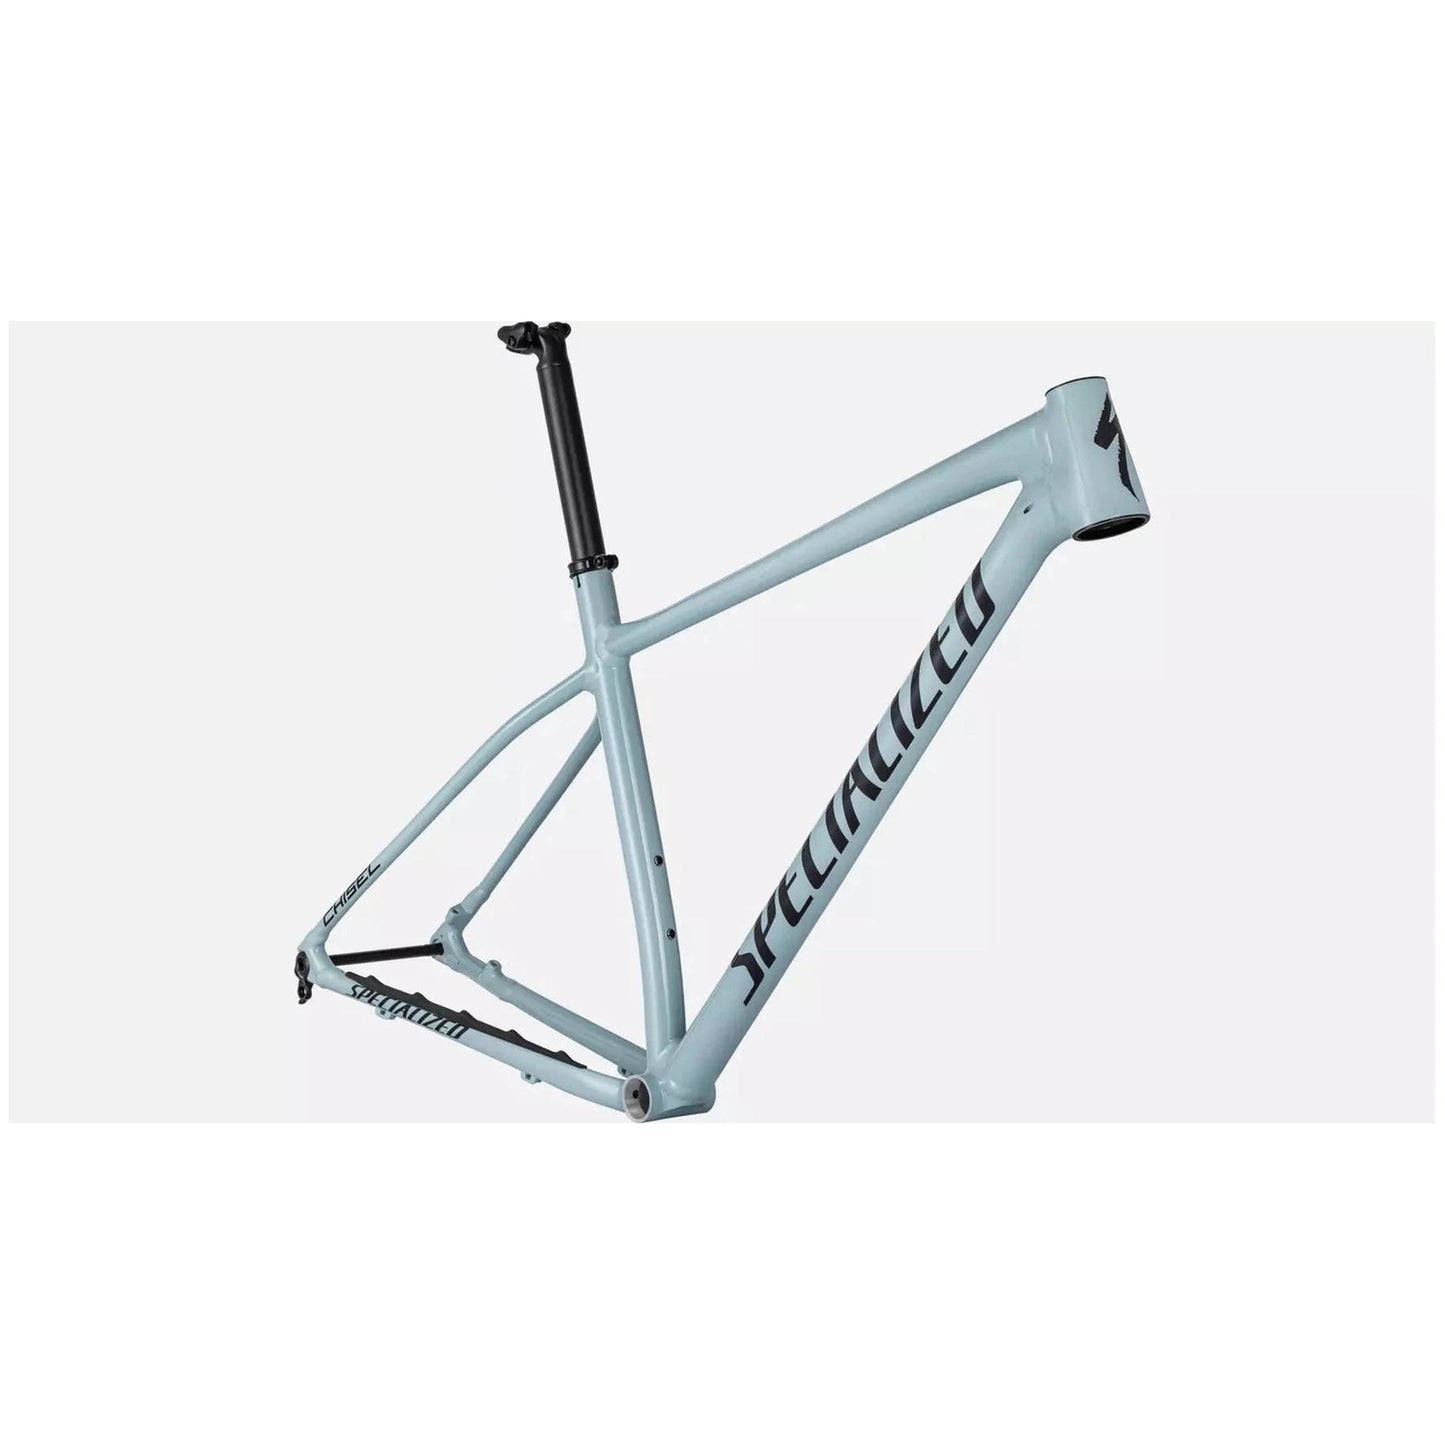 Chisel Frameset-Cycles Direct Specialized